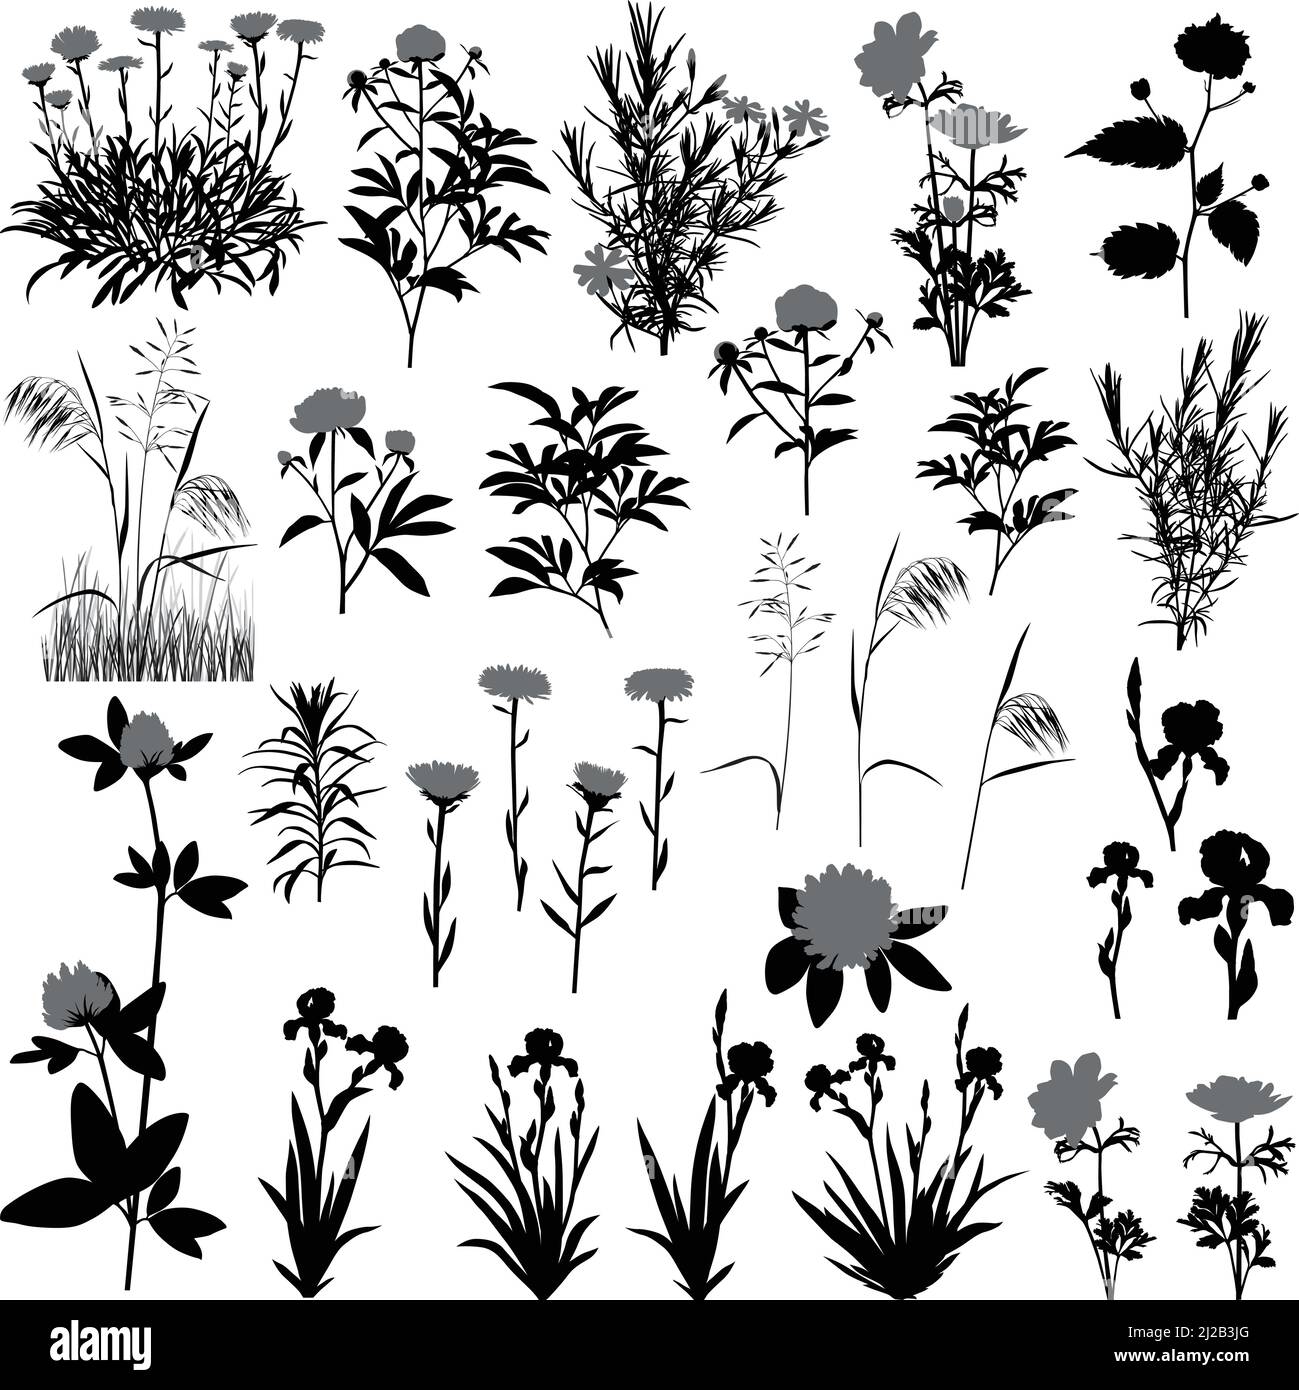 Silhouettes of flowers and plants: anemone, aster, clover, iris, kerria, peony, phlox and meadow plants Stock Vector